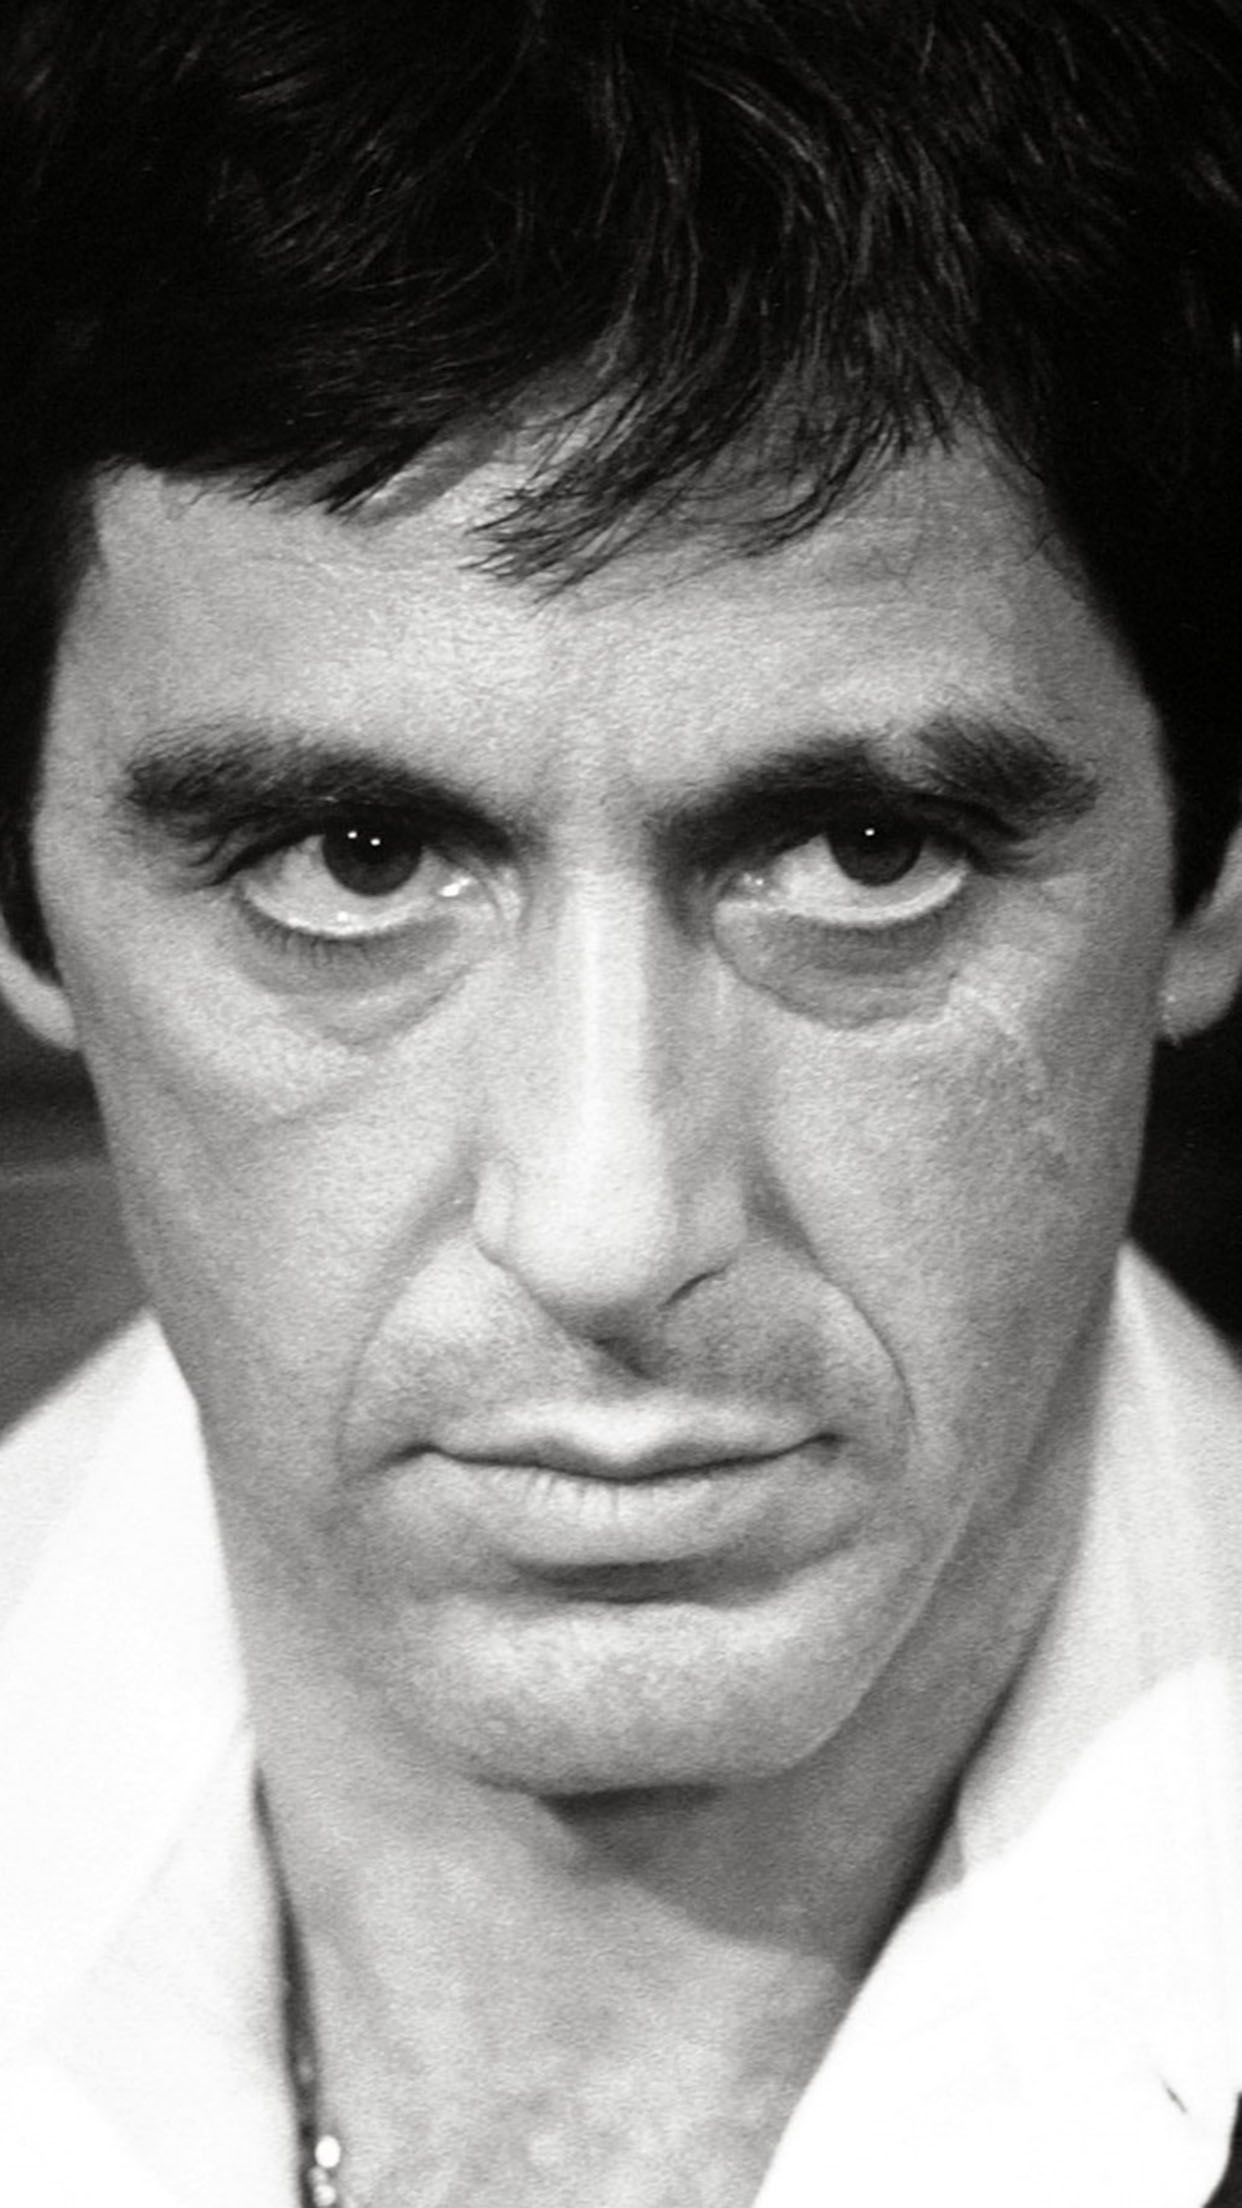 Scarface al pacino wallpaper for iphone pro max x